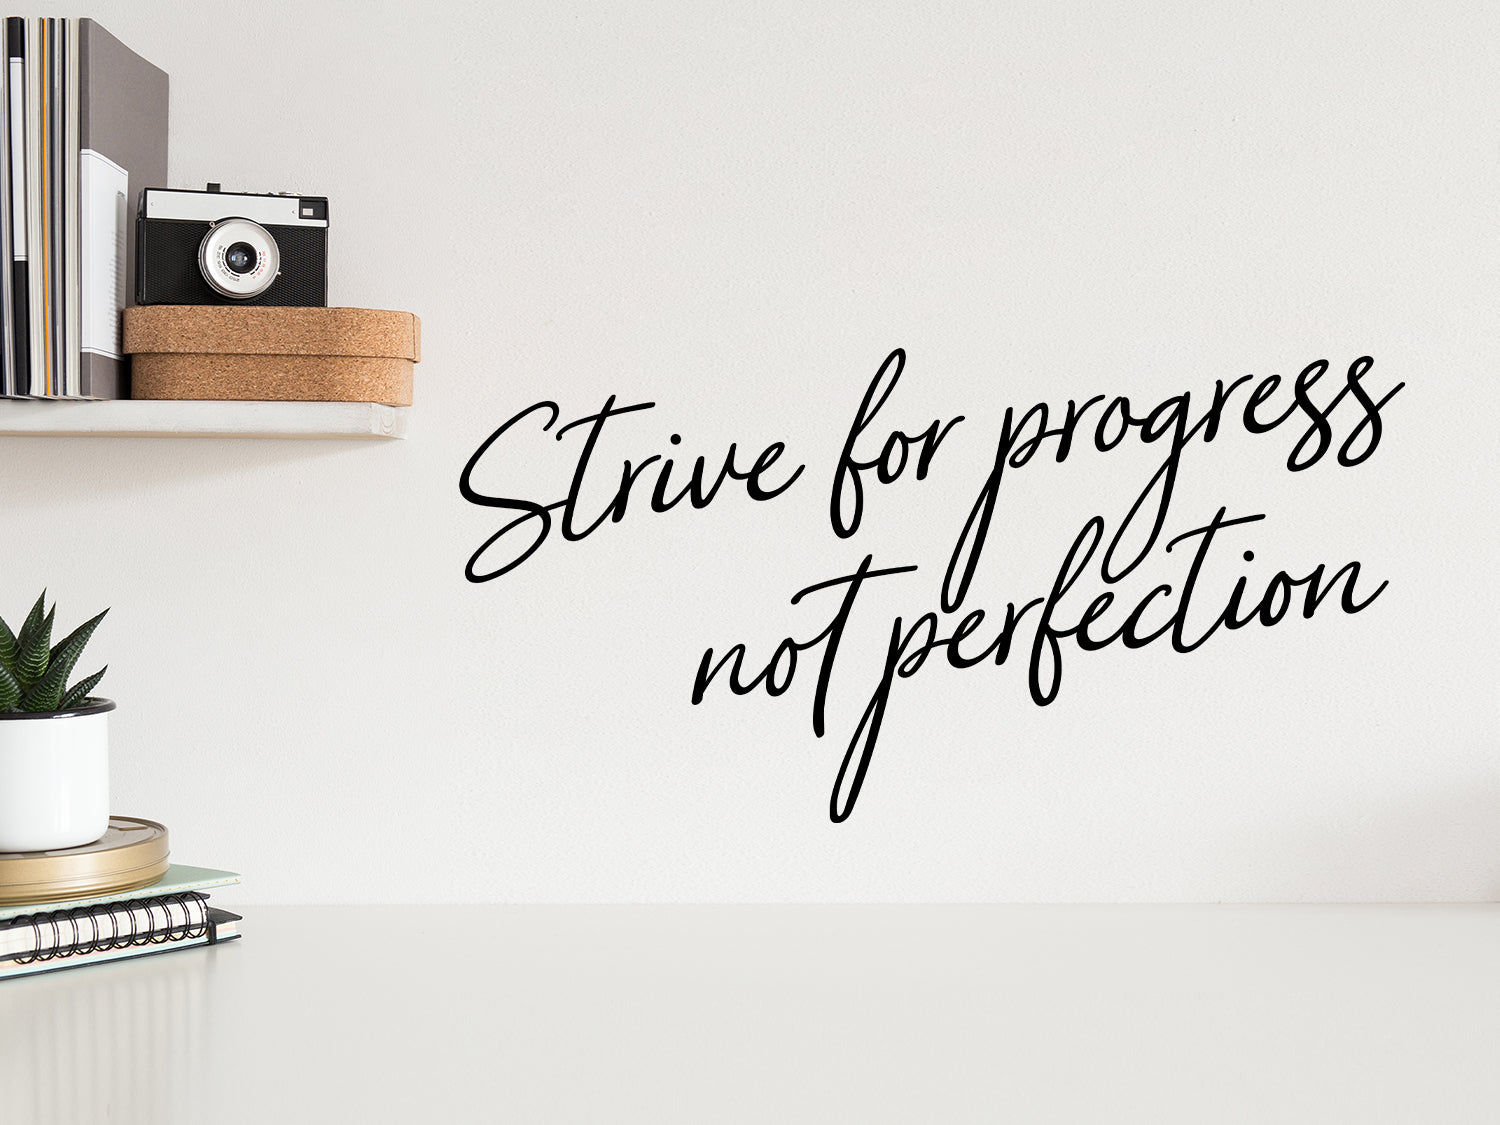 strive for progress not perfection